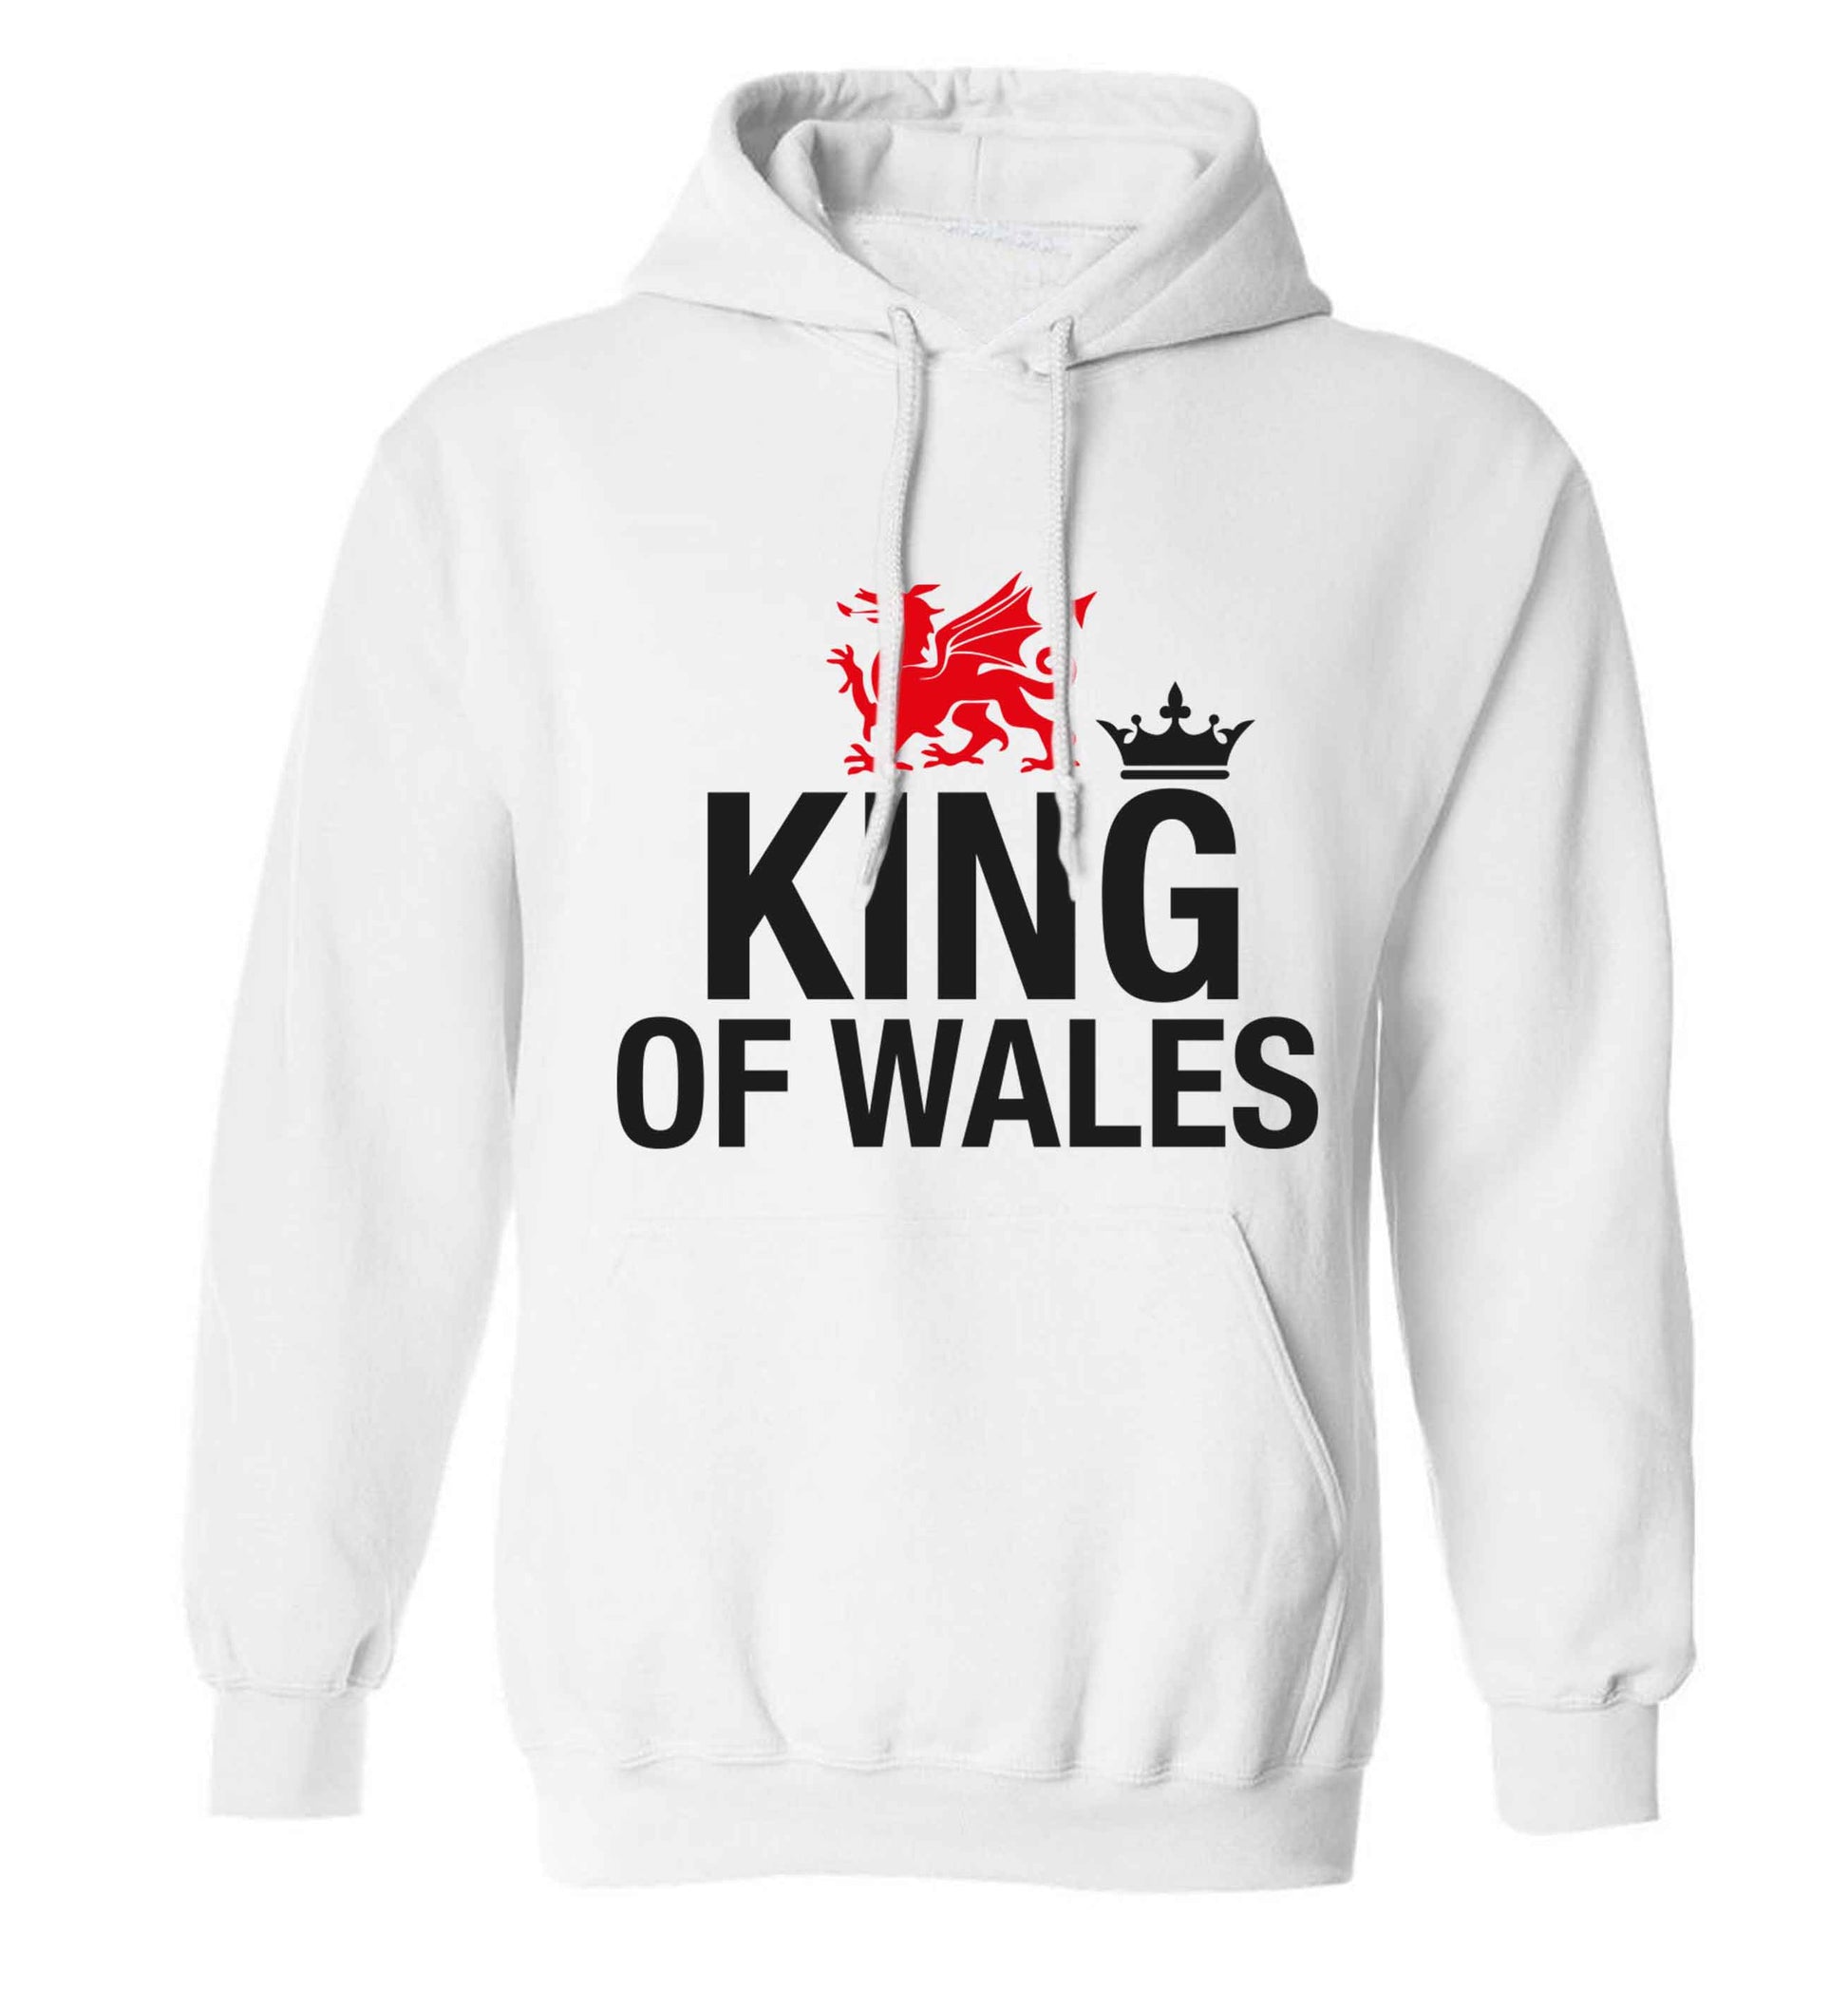 King of Wales adults unisex white hoodie 2XL